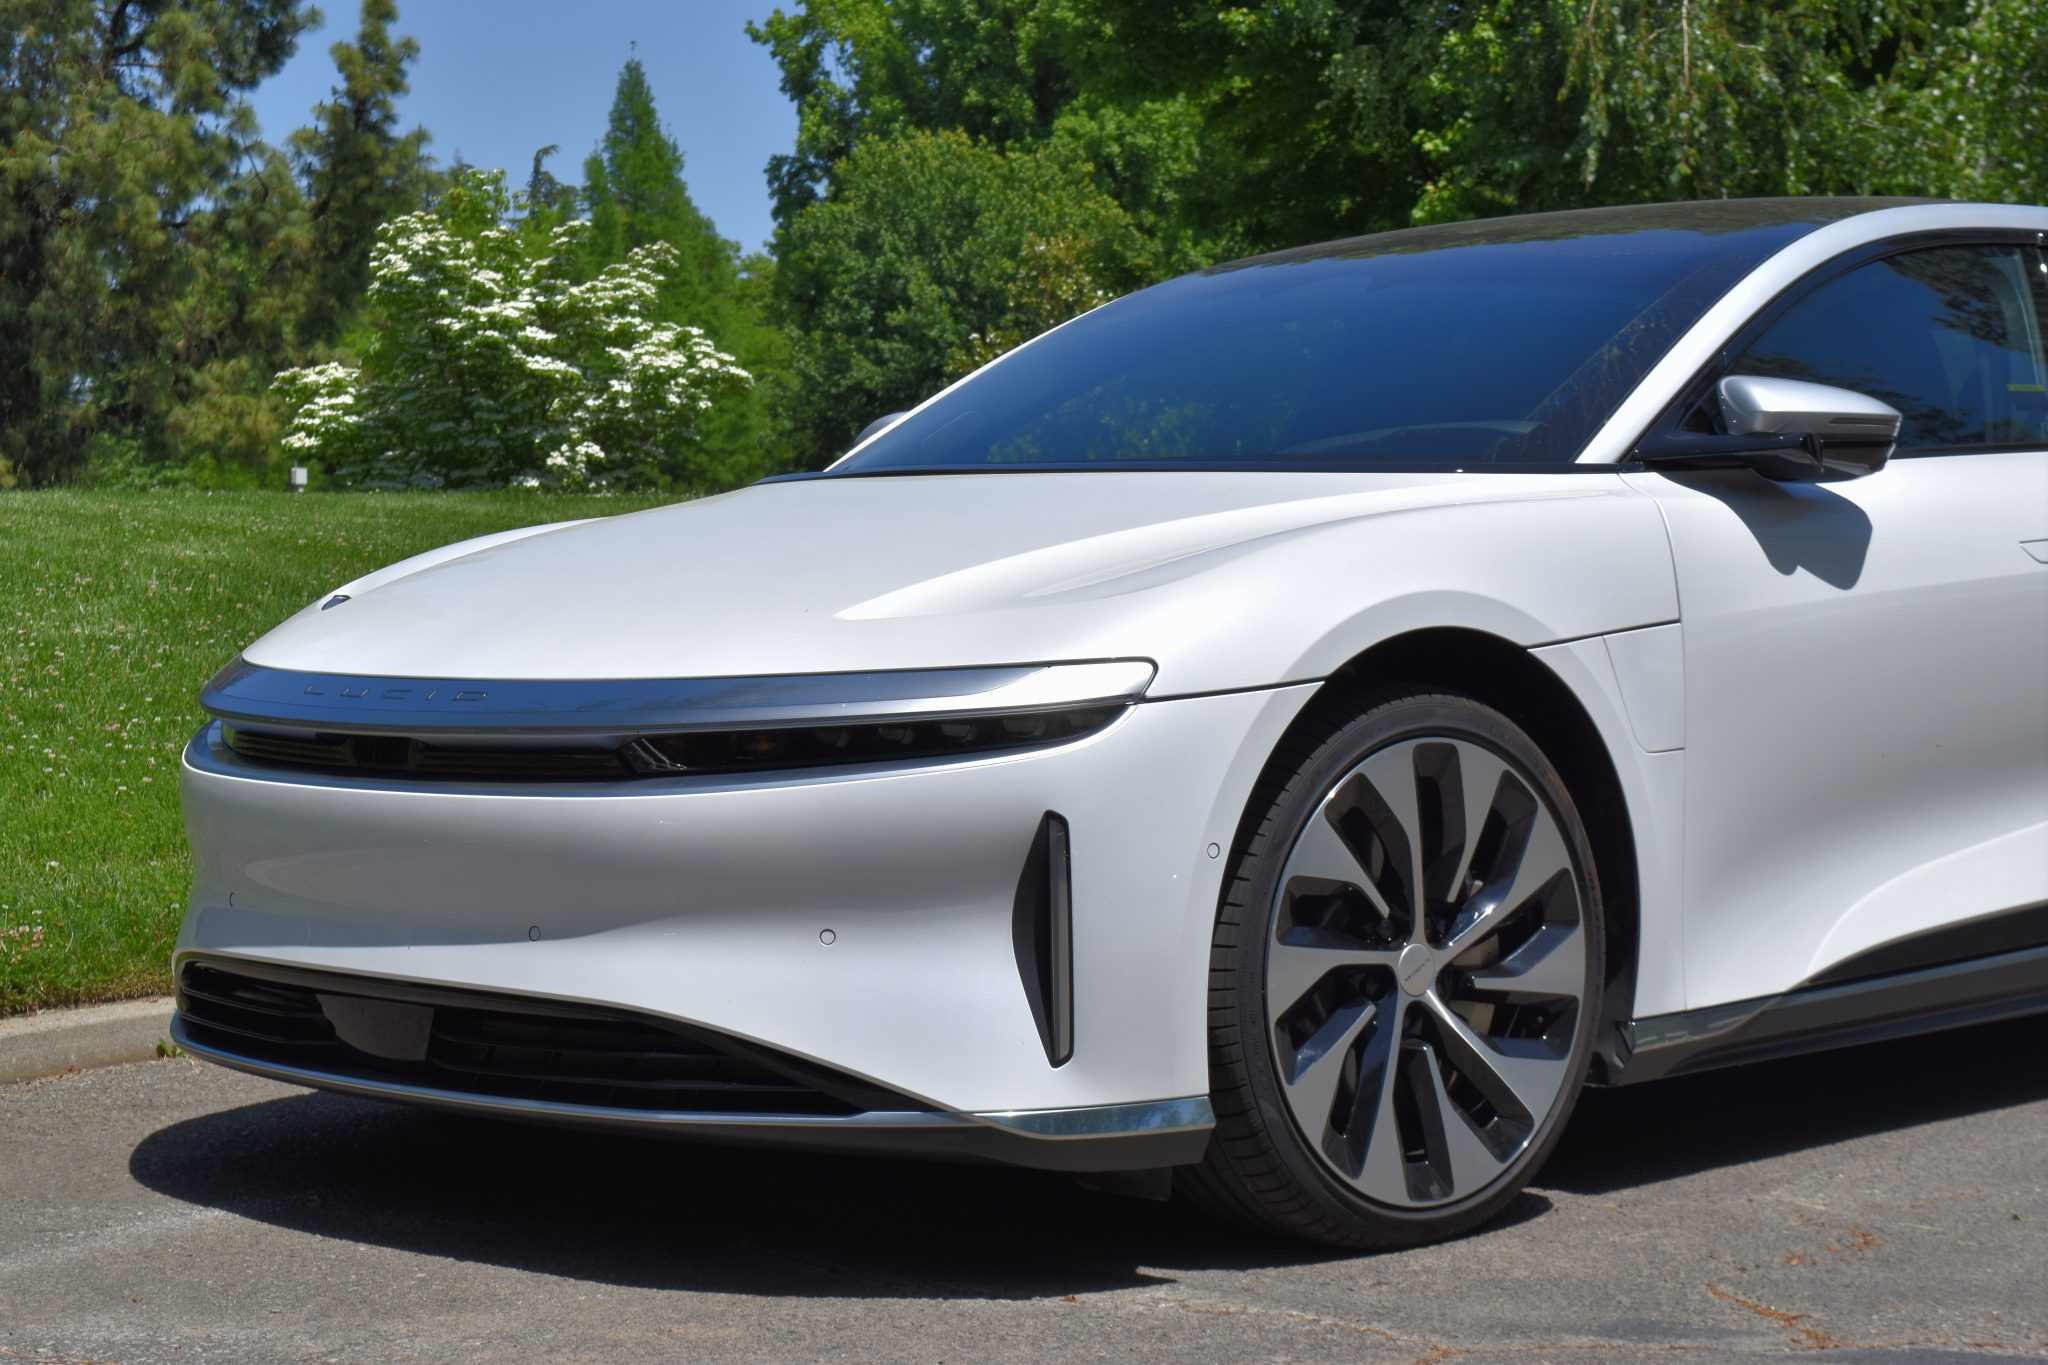 The Lucid Air debuted as a luxury electric sedan in later 2021. It has a 516-mile range.